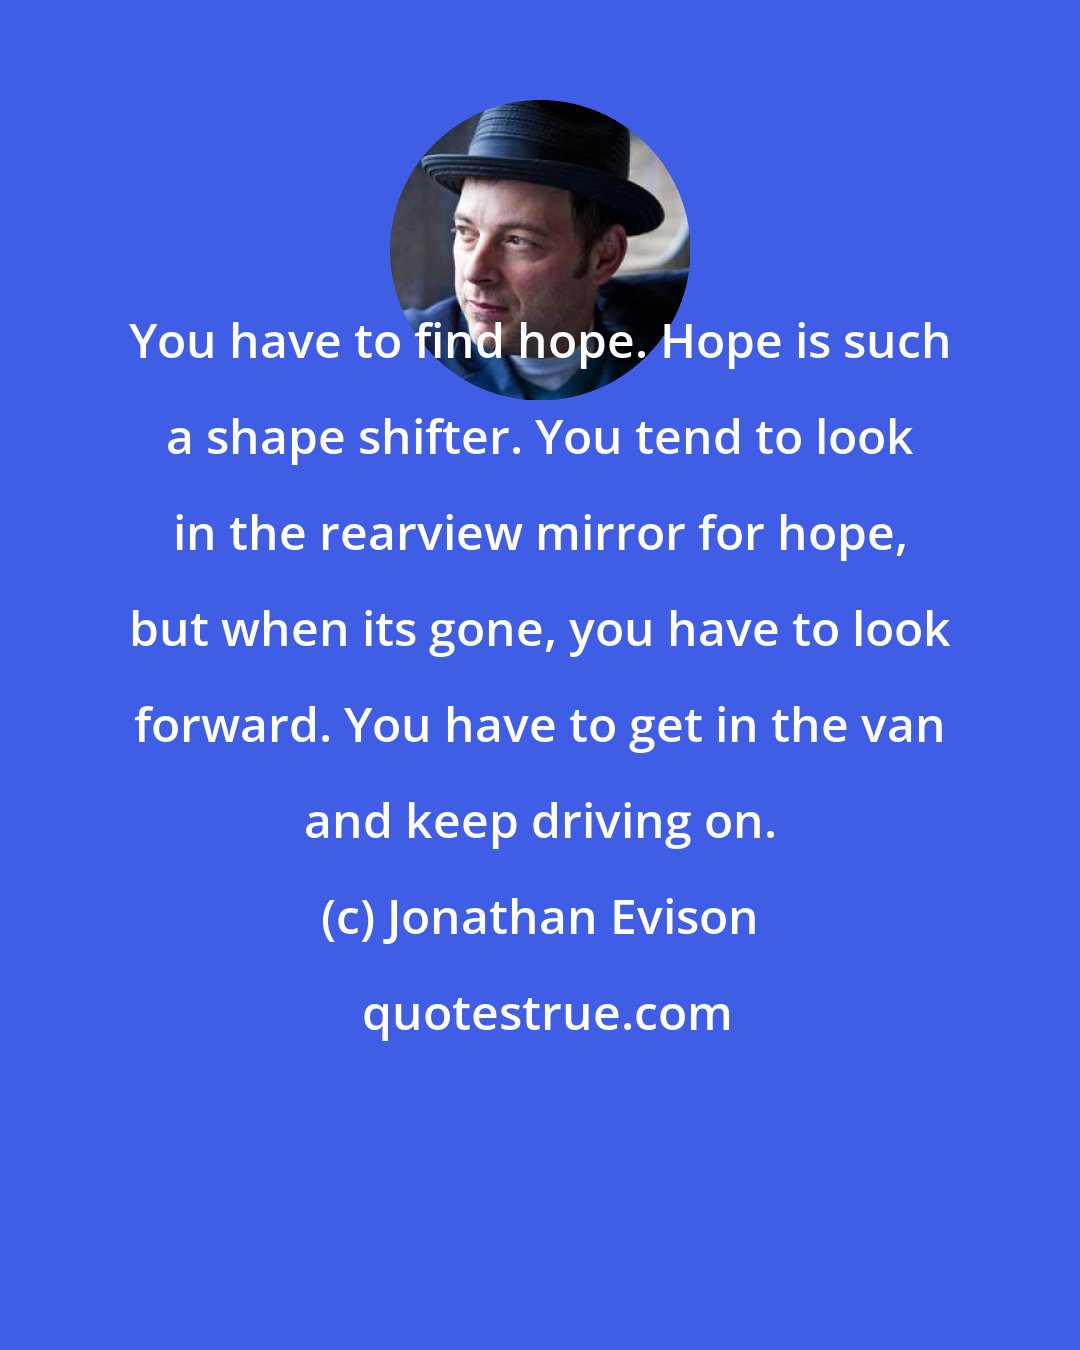 Jonathan Evison: You have to find hope. Hope is such a shape shifter. You tend to look in the rearview mirror for hope, but when its gone, you have to look forward. You have to get in the van and keep driving on.